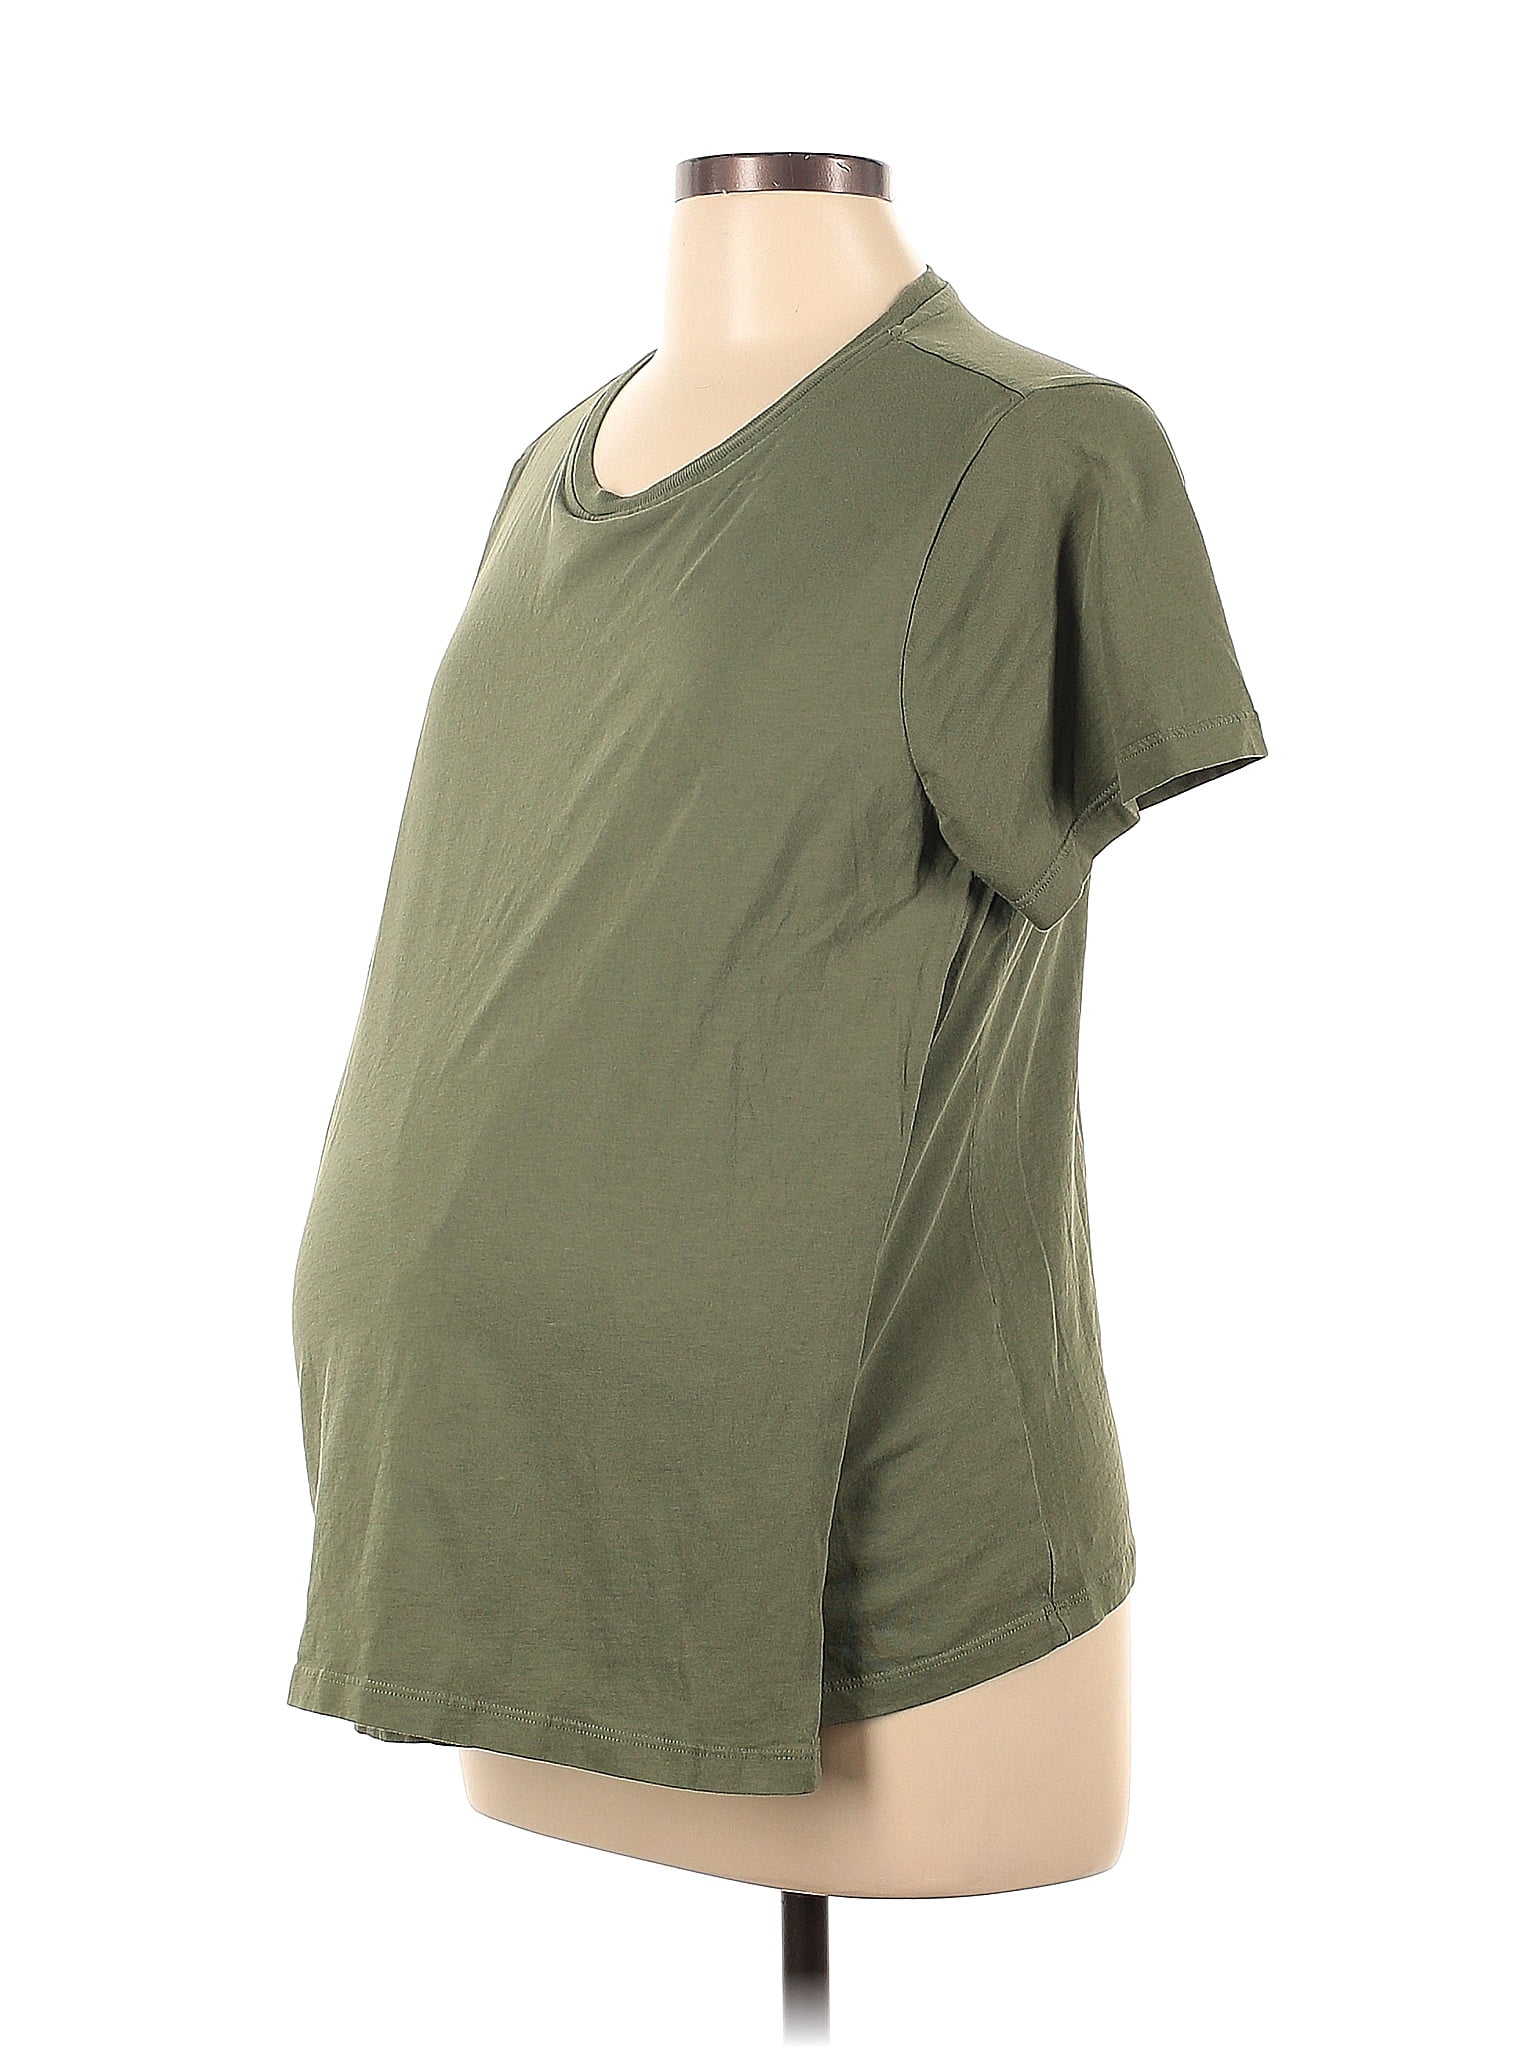 Kindred Bravely Gray Short Sleeve T-Shirt Size L (Maternity) - 50% off